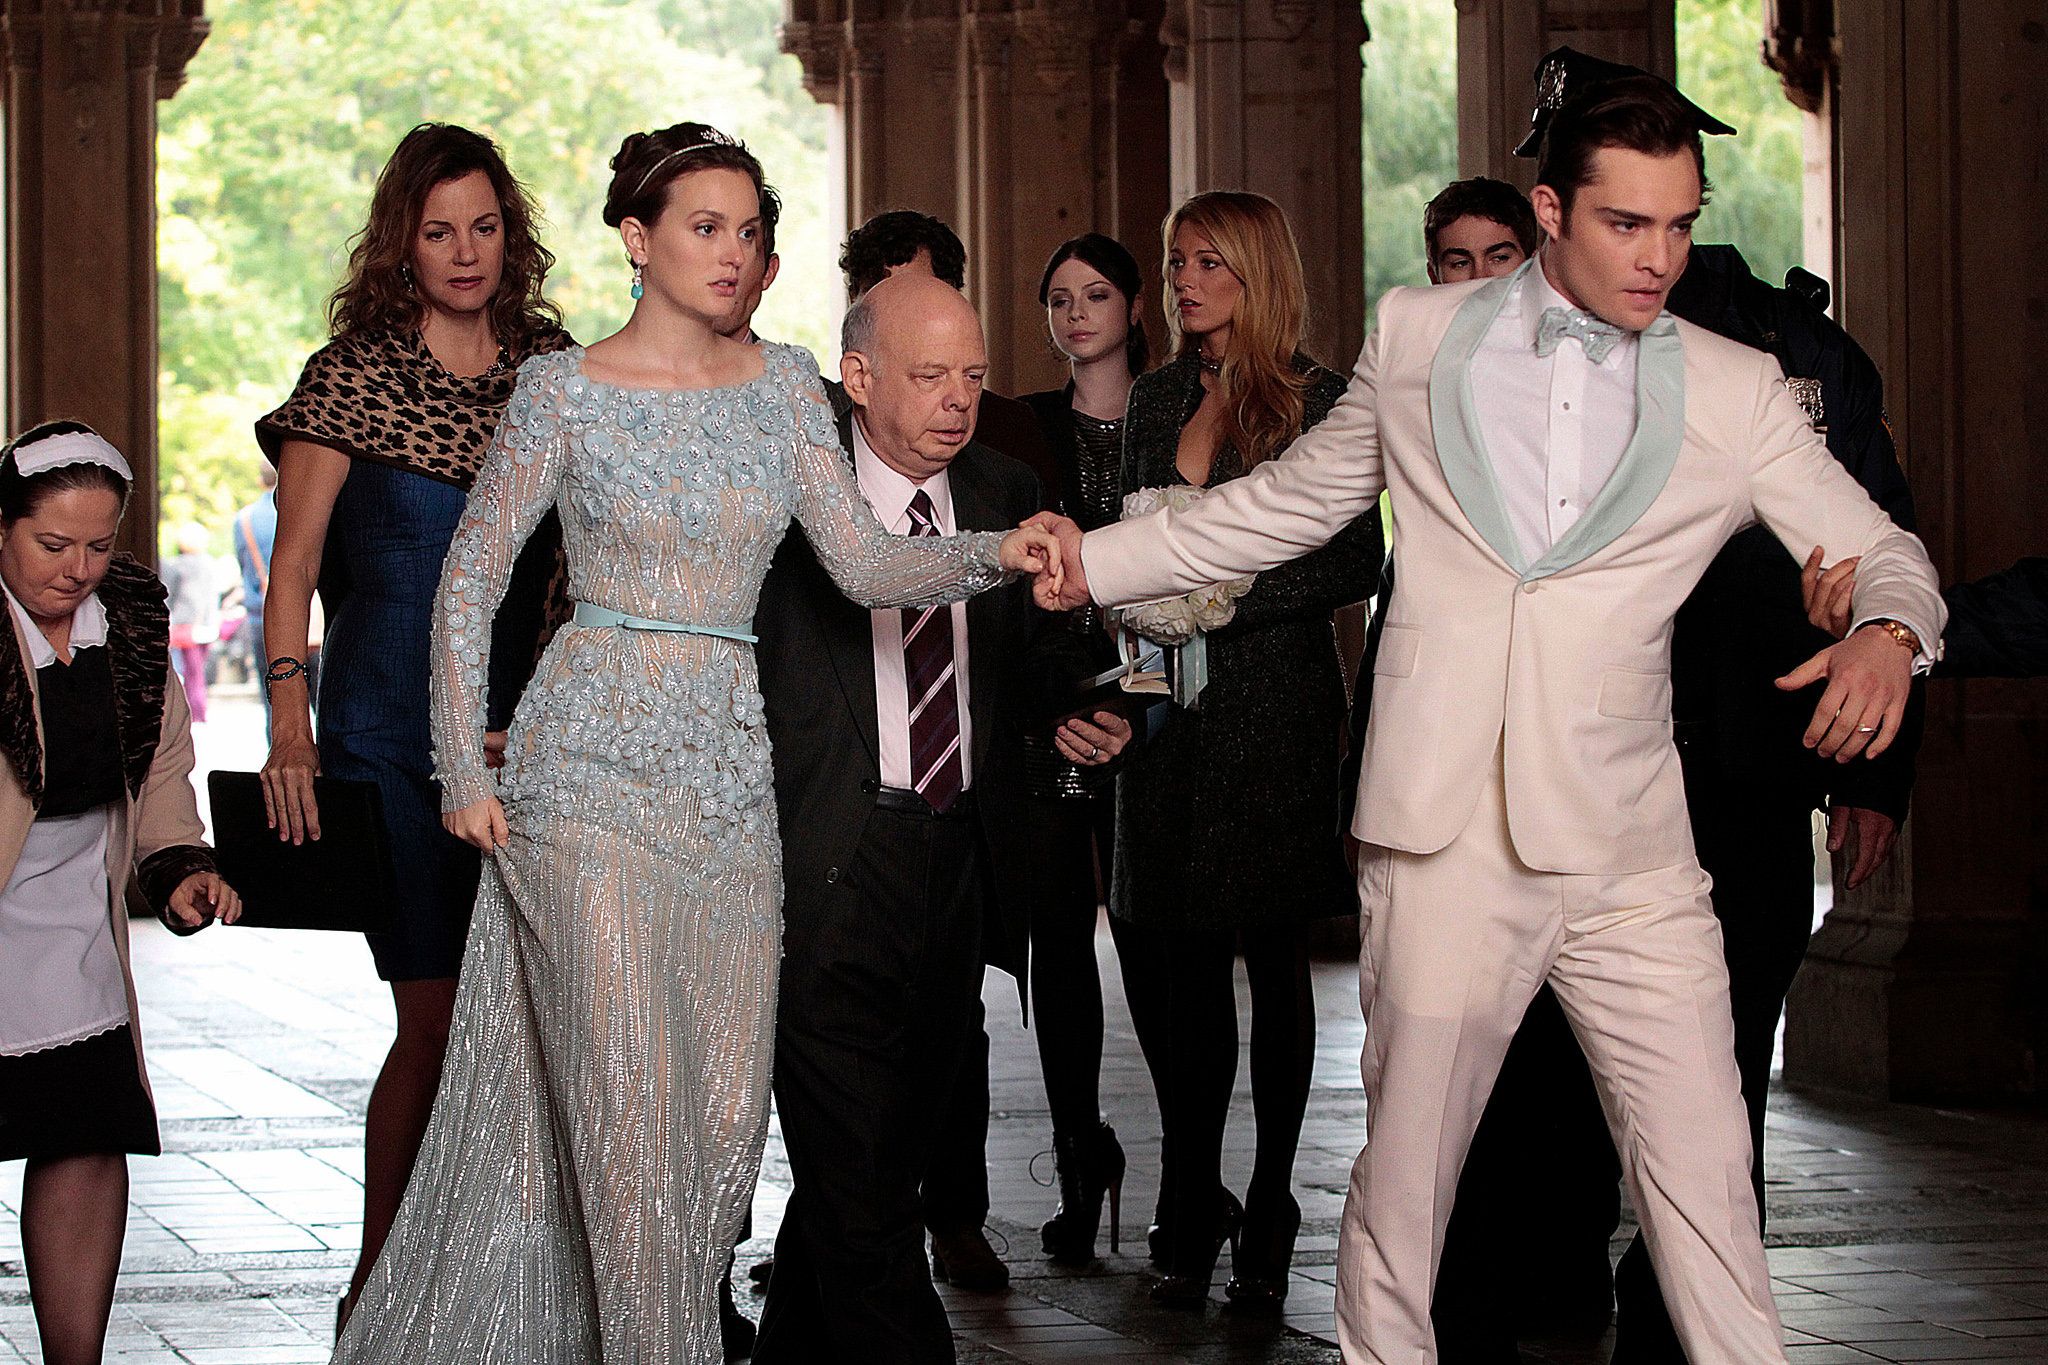 Gossip Girl 20 Things That Make No Sense About Blair And Chuck’s Relationship